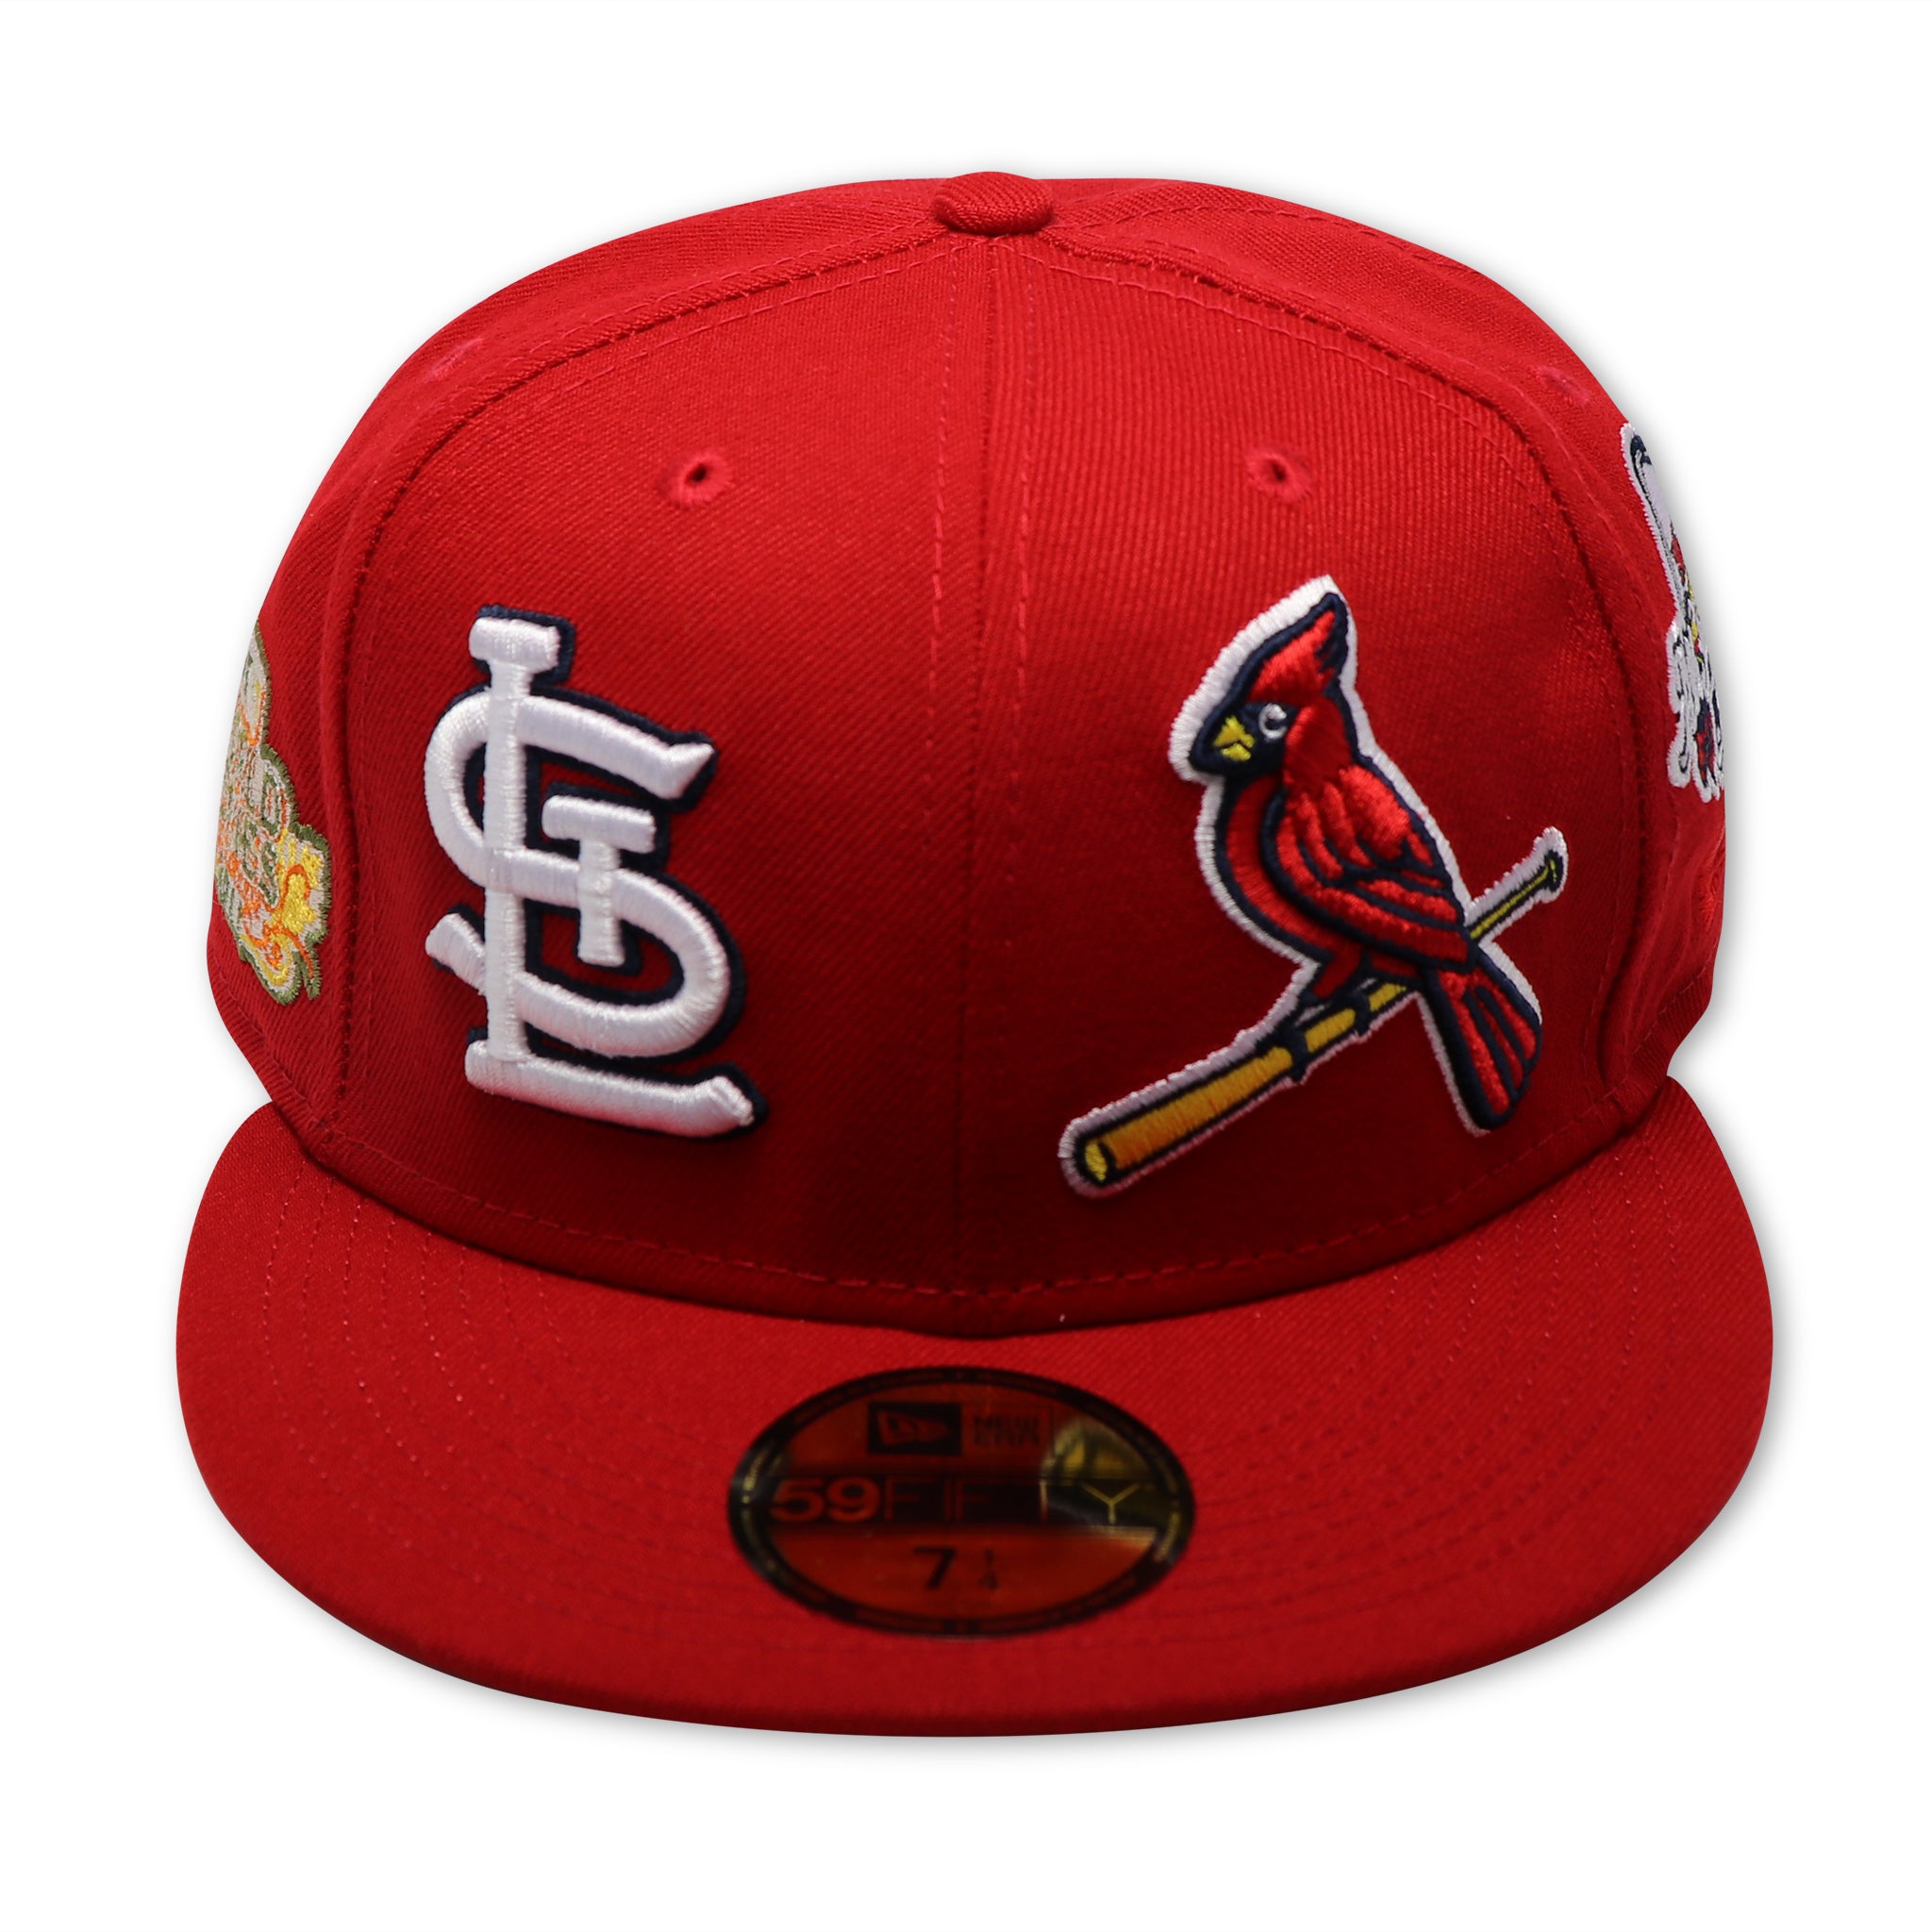 ST. LOUIS CARDINALS (PATCH PRIDE) NEW ERA 59FIFTY FITTED